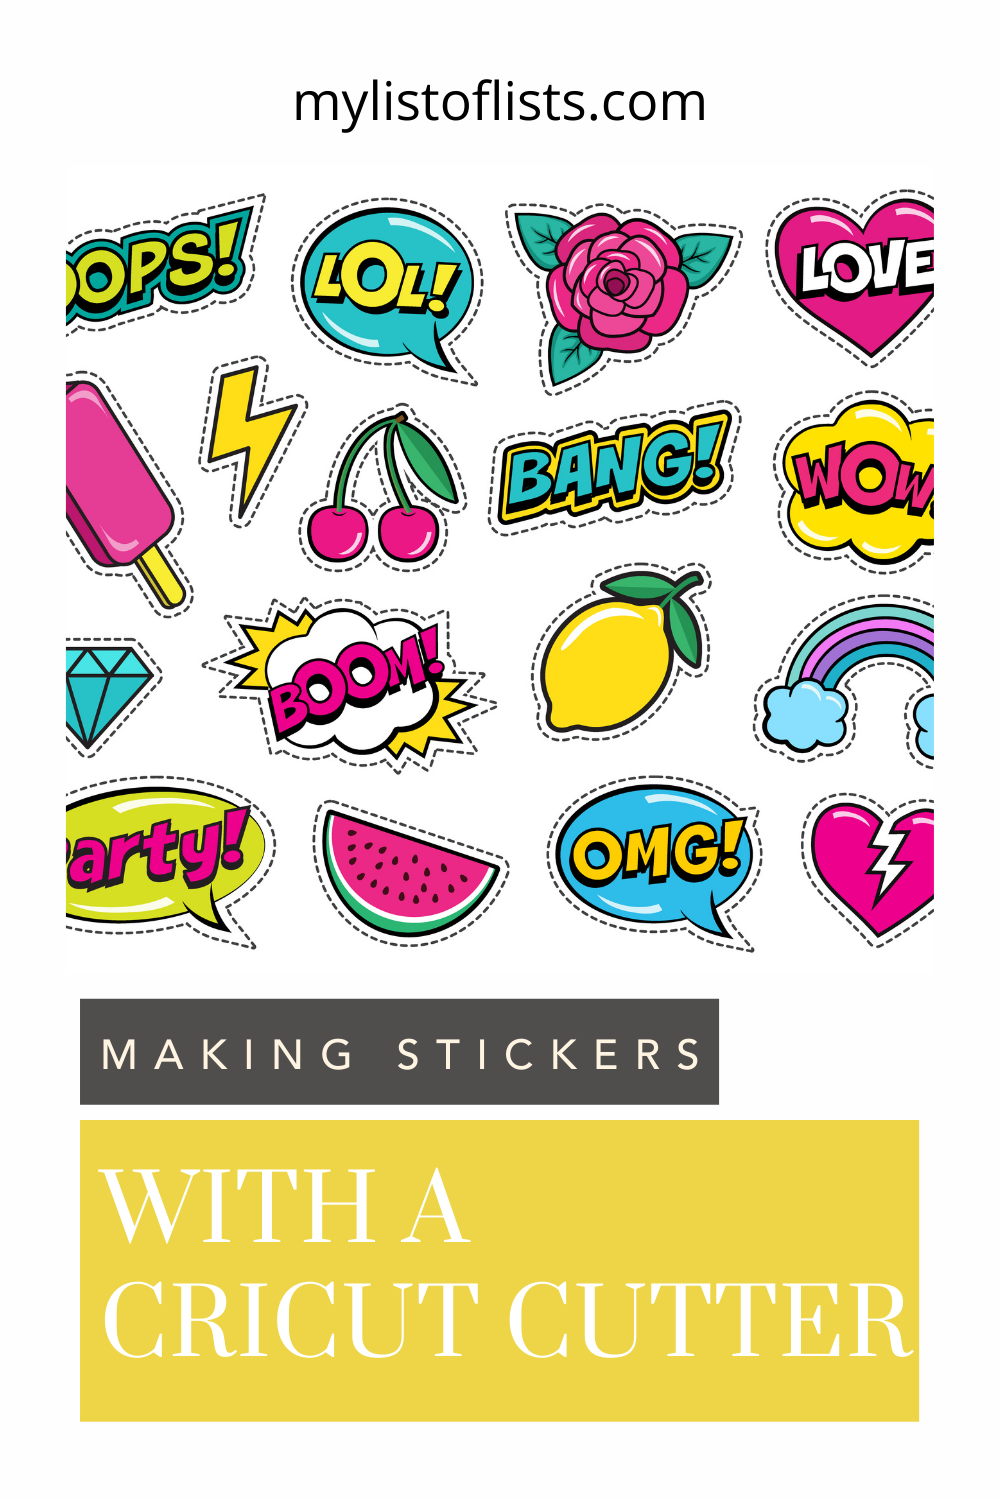 Mylistoflists.com has a little bit of everything. Read through tips that will make your life easier and more creative! Whether for your business or personal use, learn how you can make stickers using a Cricut cutting machine!